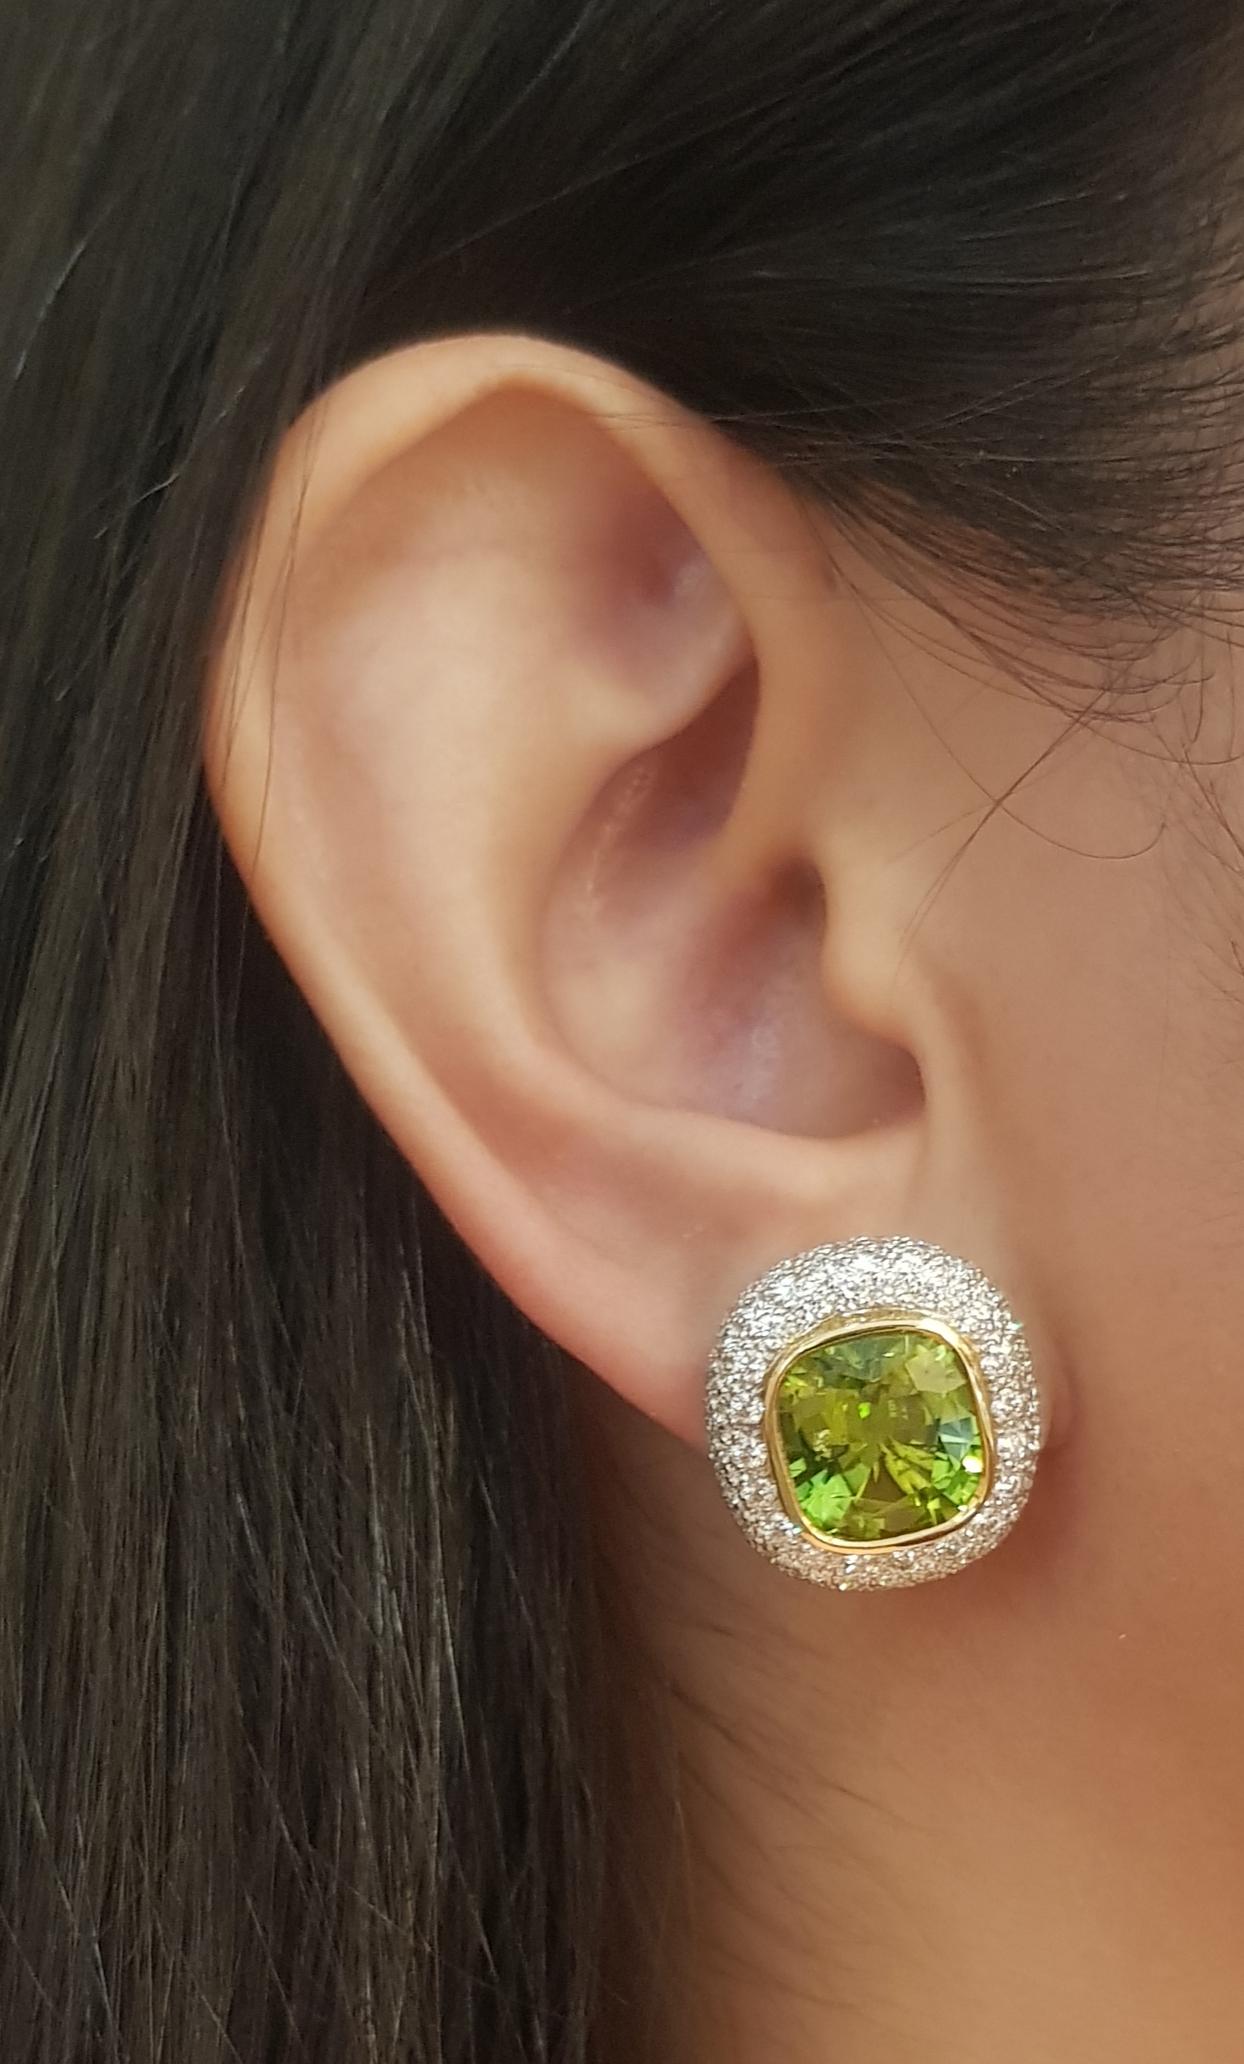 Peridot 10.73 carats with Diamond 2.89 carats Earrings set in 18K Gold Settings

Width: 1.7 cm 
Length: 1.7 cm
Total Weight: 16.41 grams

